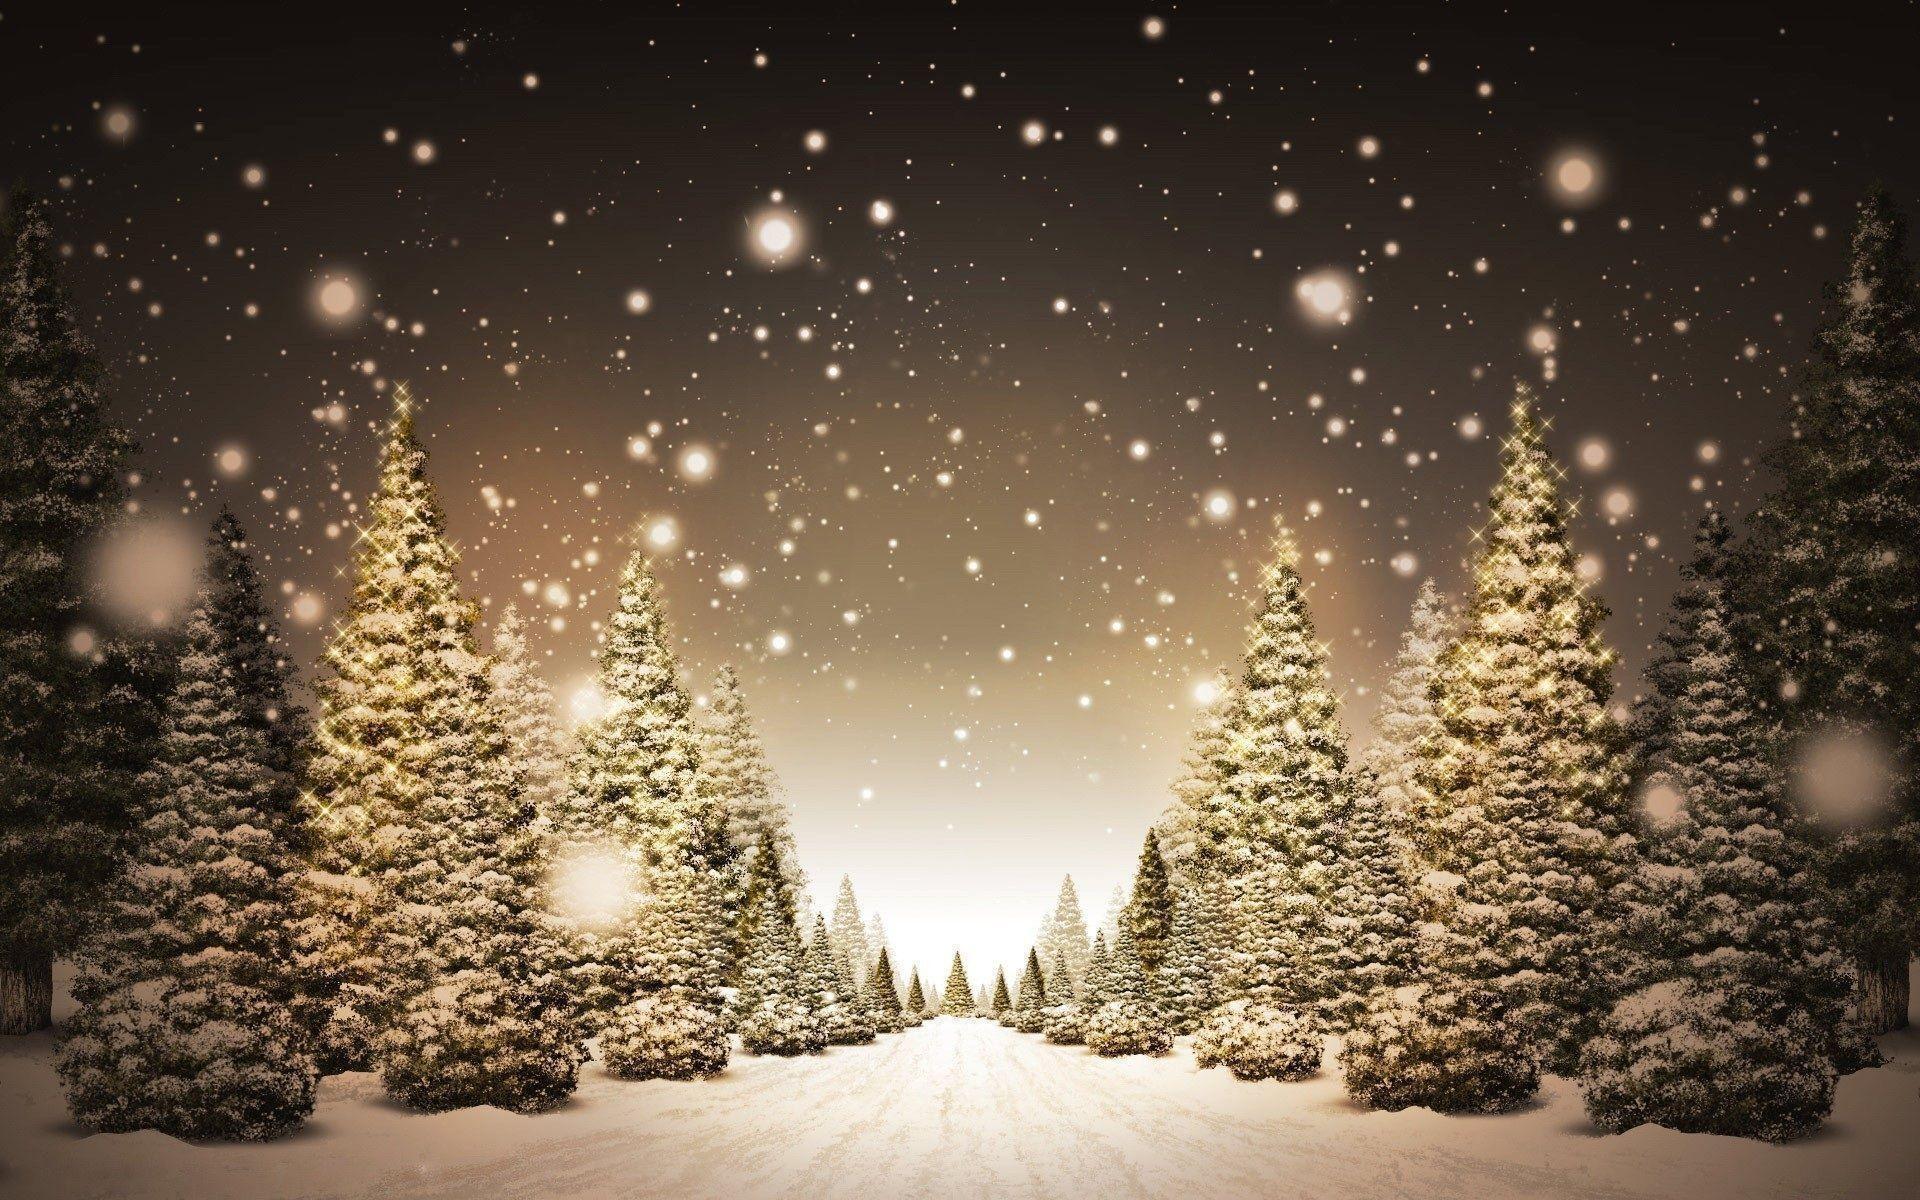 Download Winter Night 13351 1920x1200 px High Resolution Wallpapers